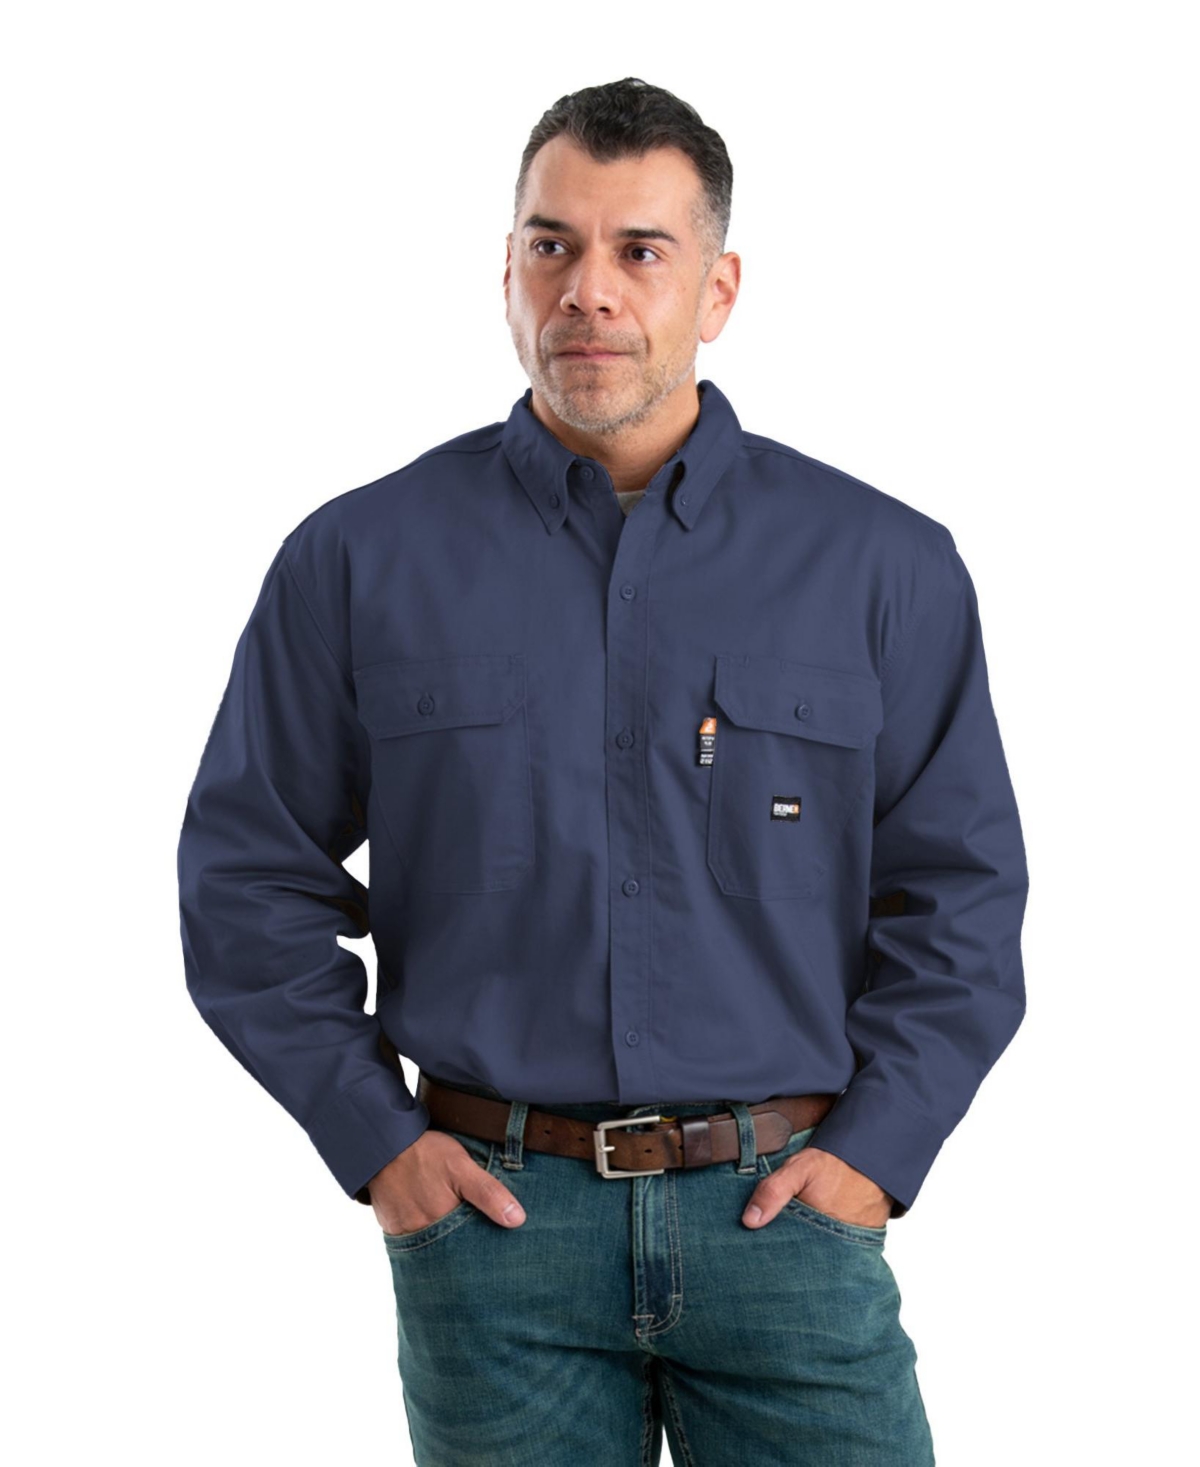 Big & Tall Flame Resistant Button Down Long Sleeve Work Shirt - Navy